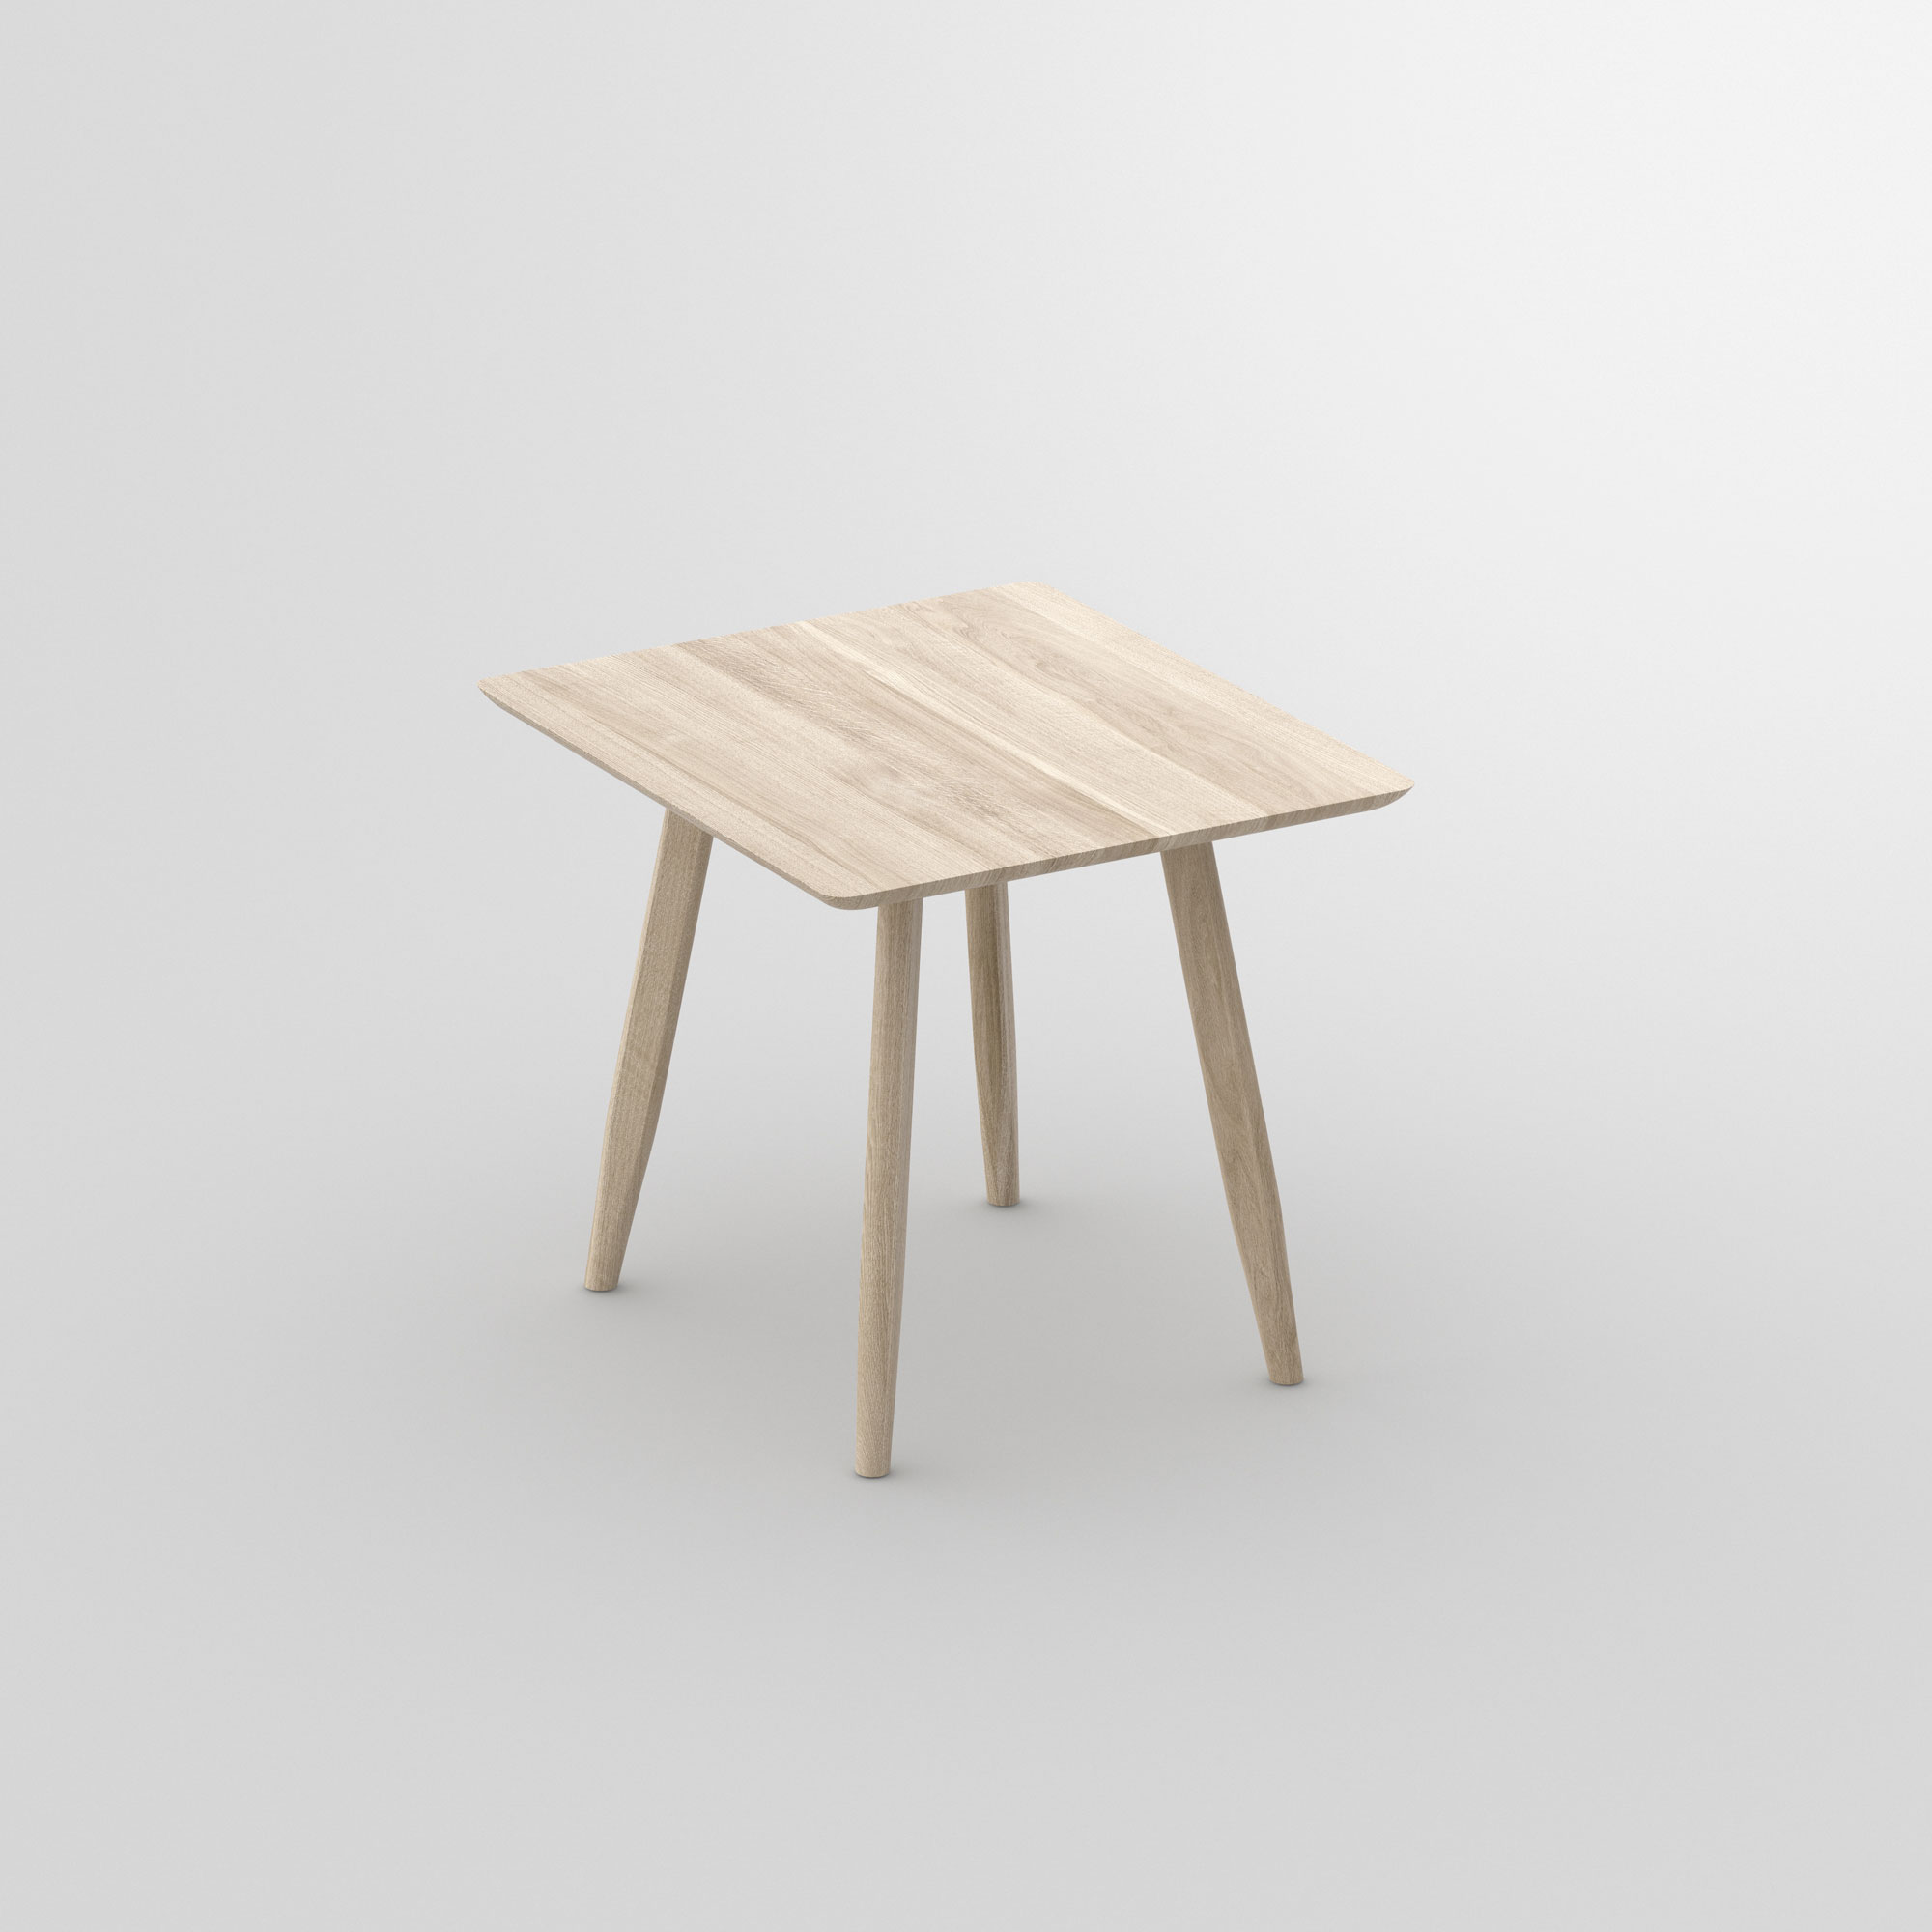 Designer Dining Table Wood AETAS BASIC 3 cam1 custom made in solid wood by vitamin design